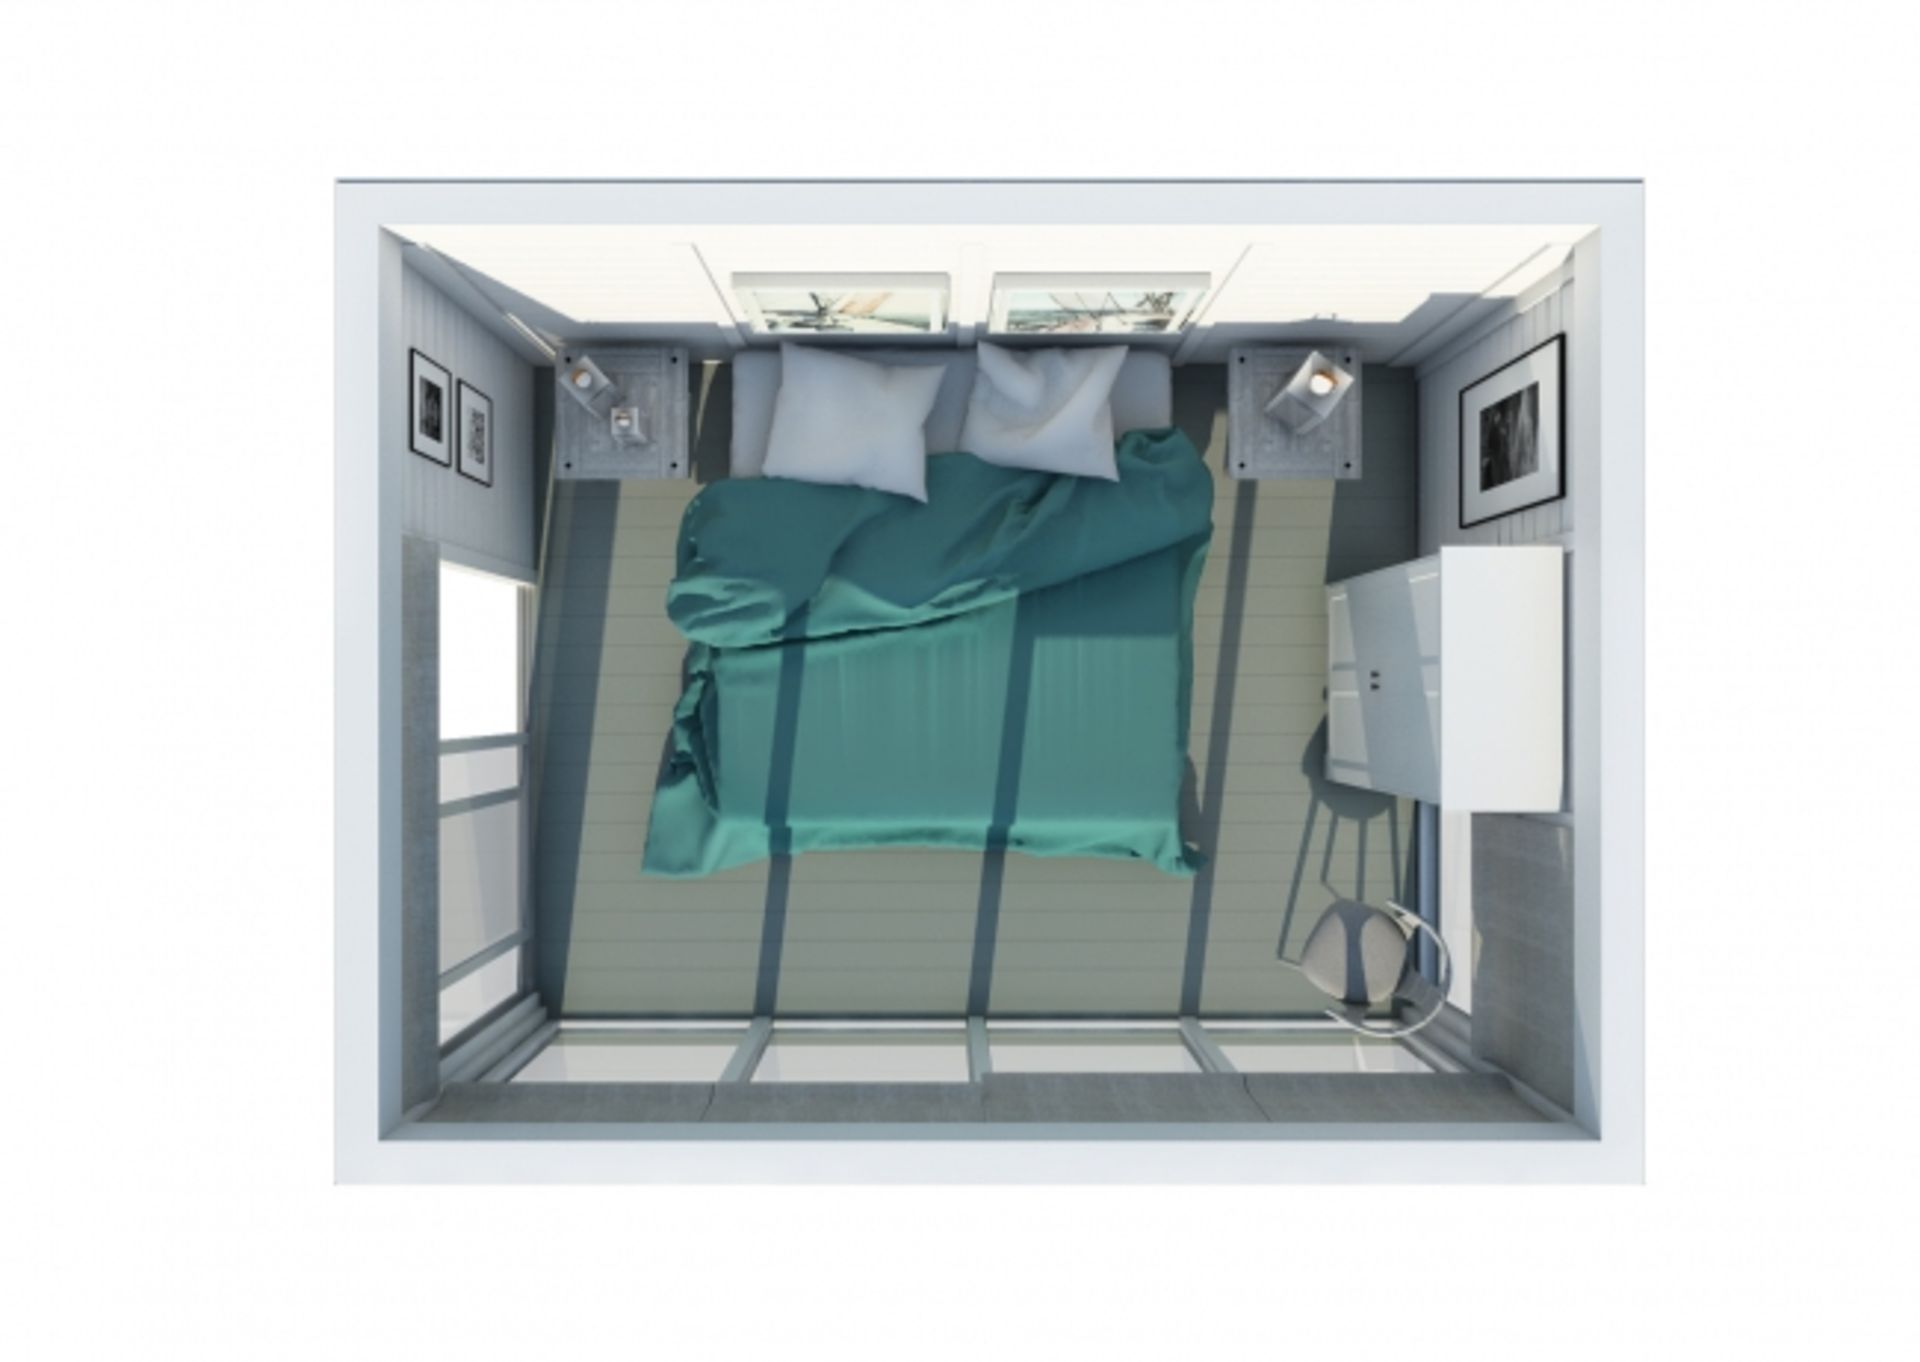 + VAT Brand New Insulated Cube Hotel Room Cabin - 3 x 4m - Insulated Walls + Glass Sliding Doors - - Image 2 of 2